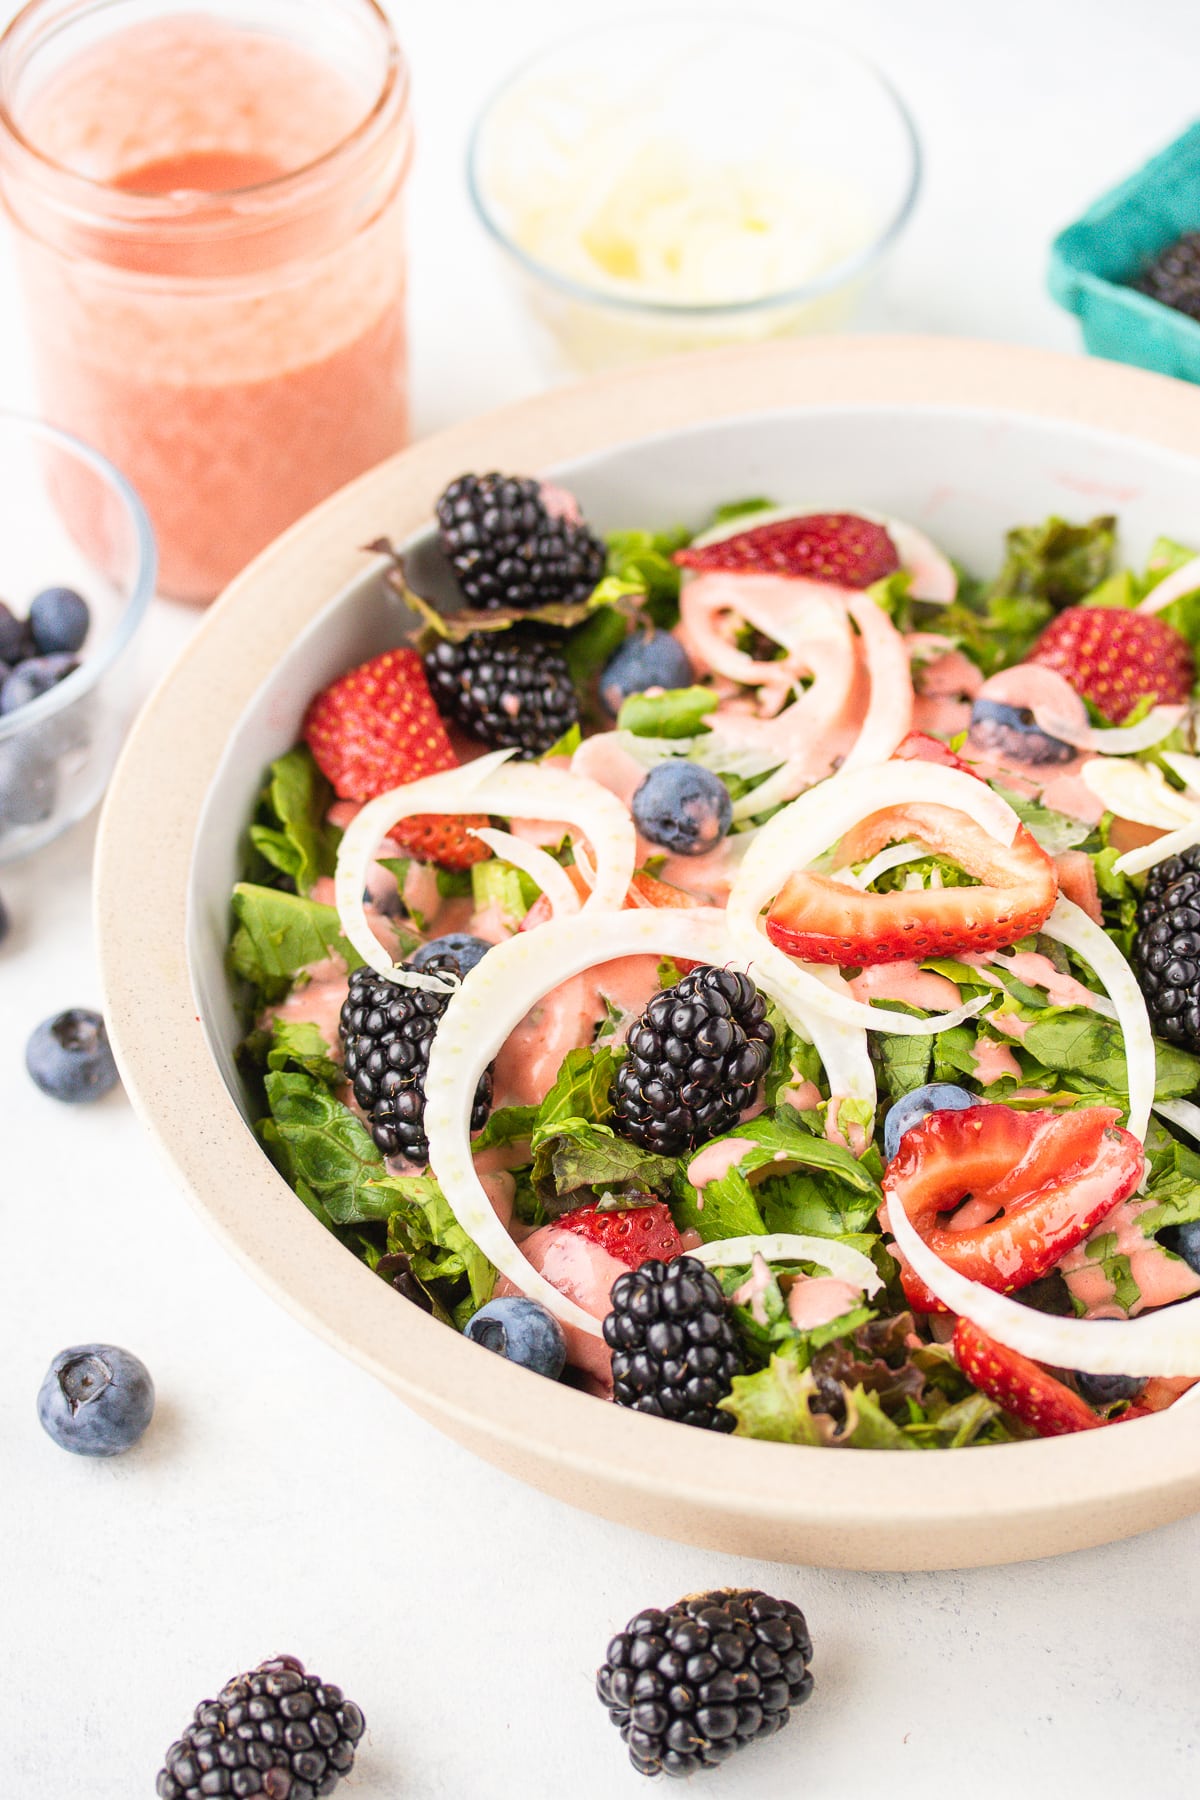 Summer Salad with Creamy Strawberry Salad Dressing in a bowl with berries, greens and fennel.